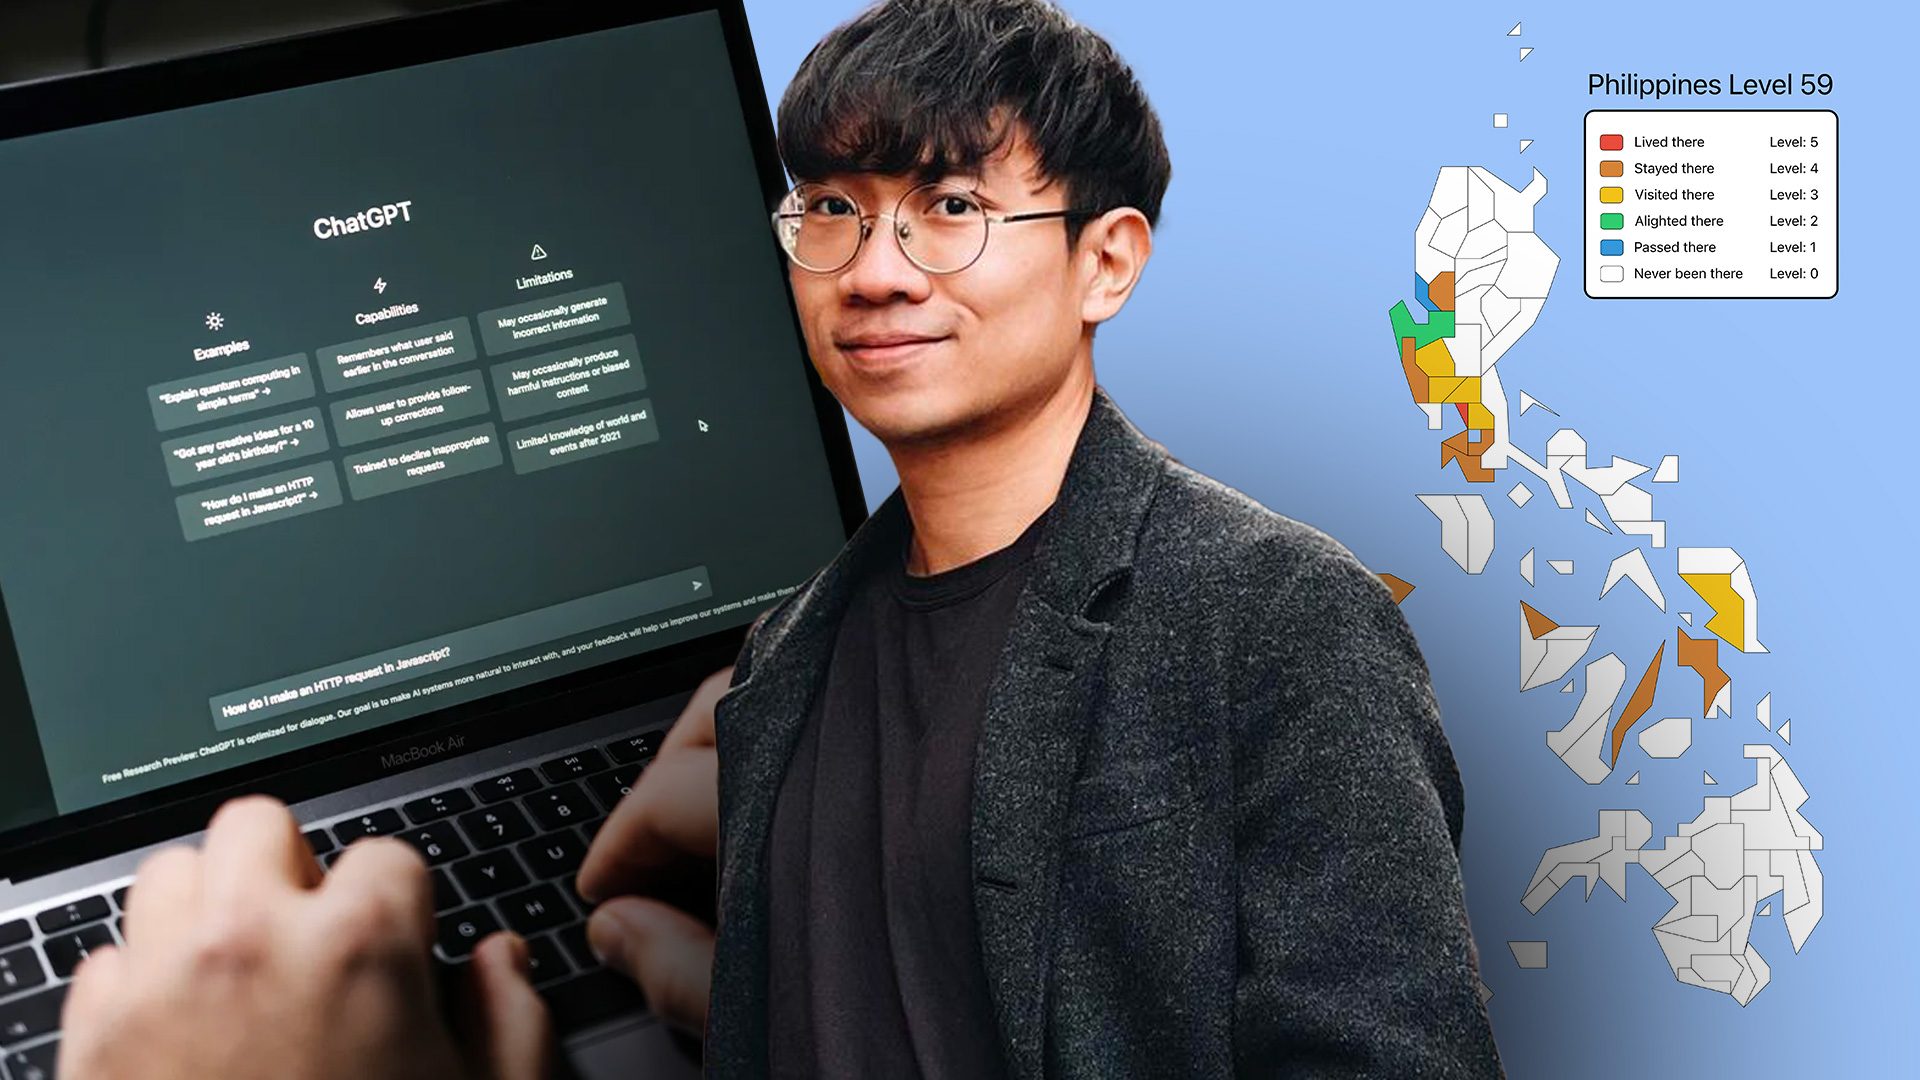 How ChatGPT helped software engineer create viral Philippine travel level map website